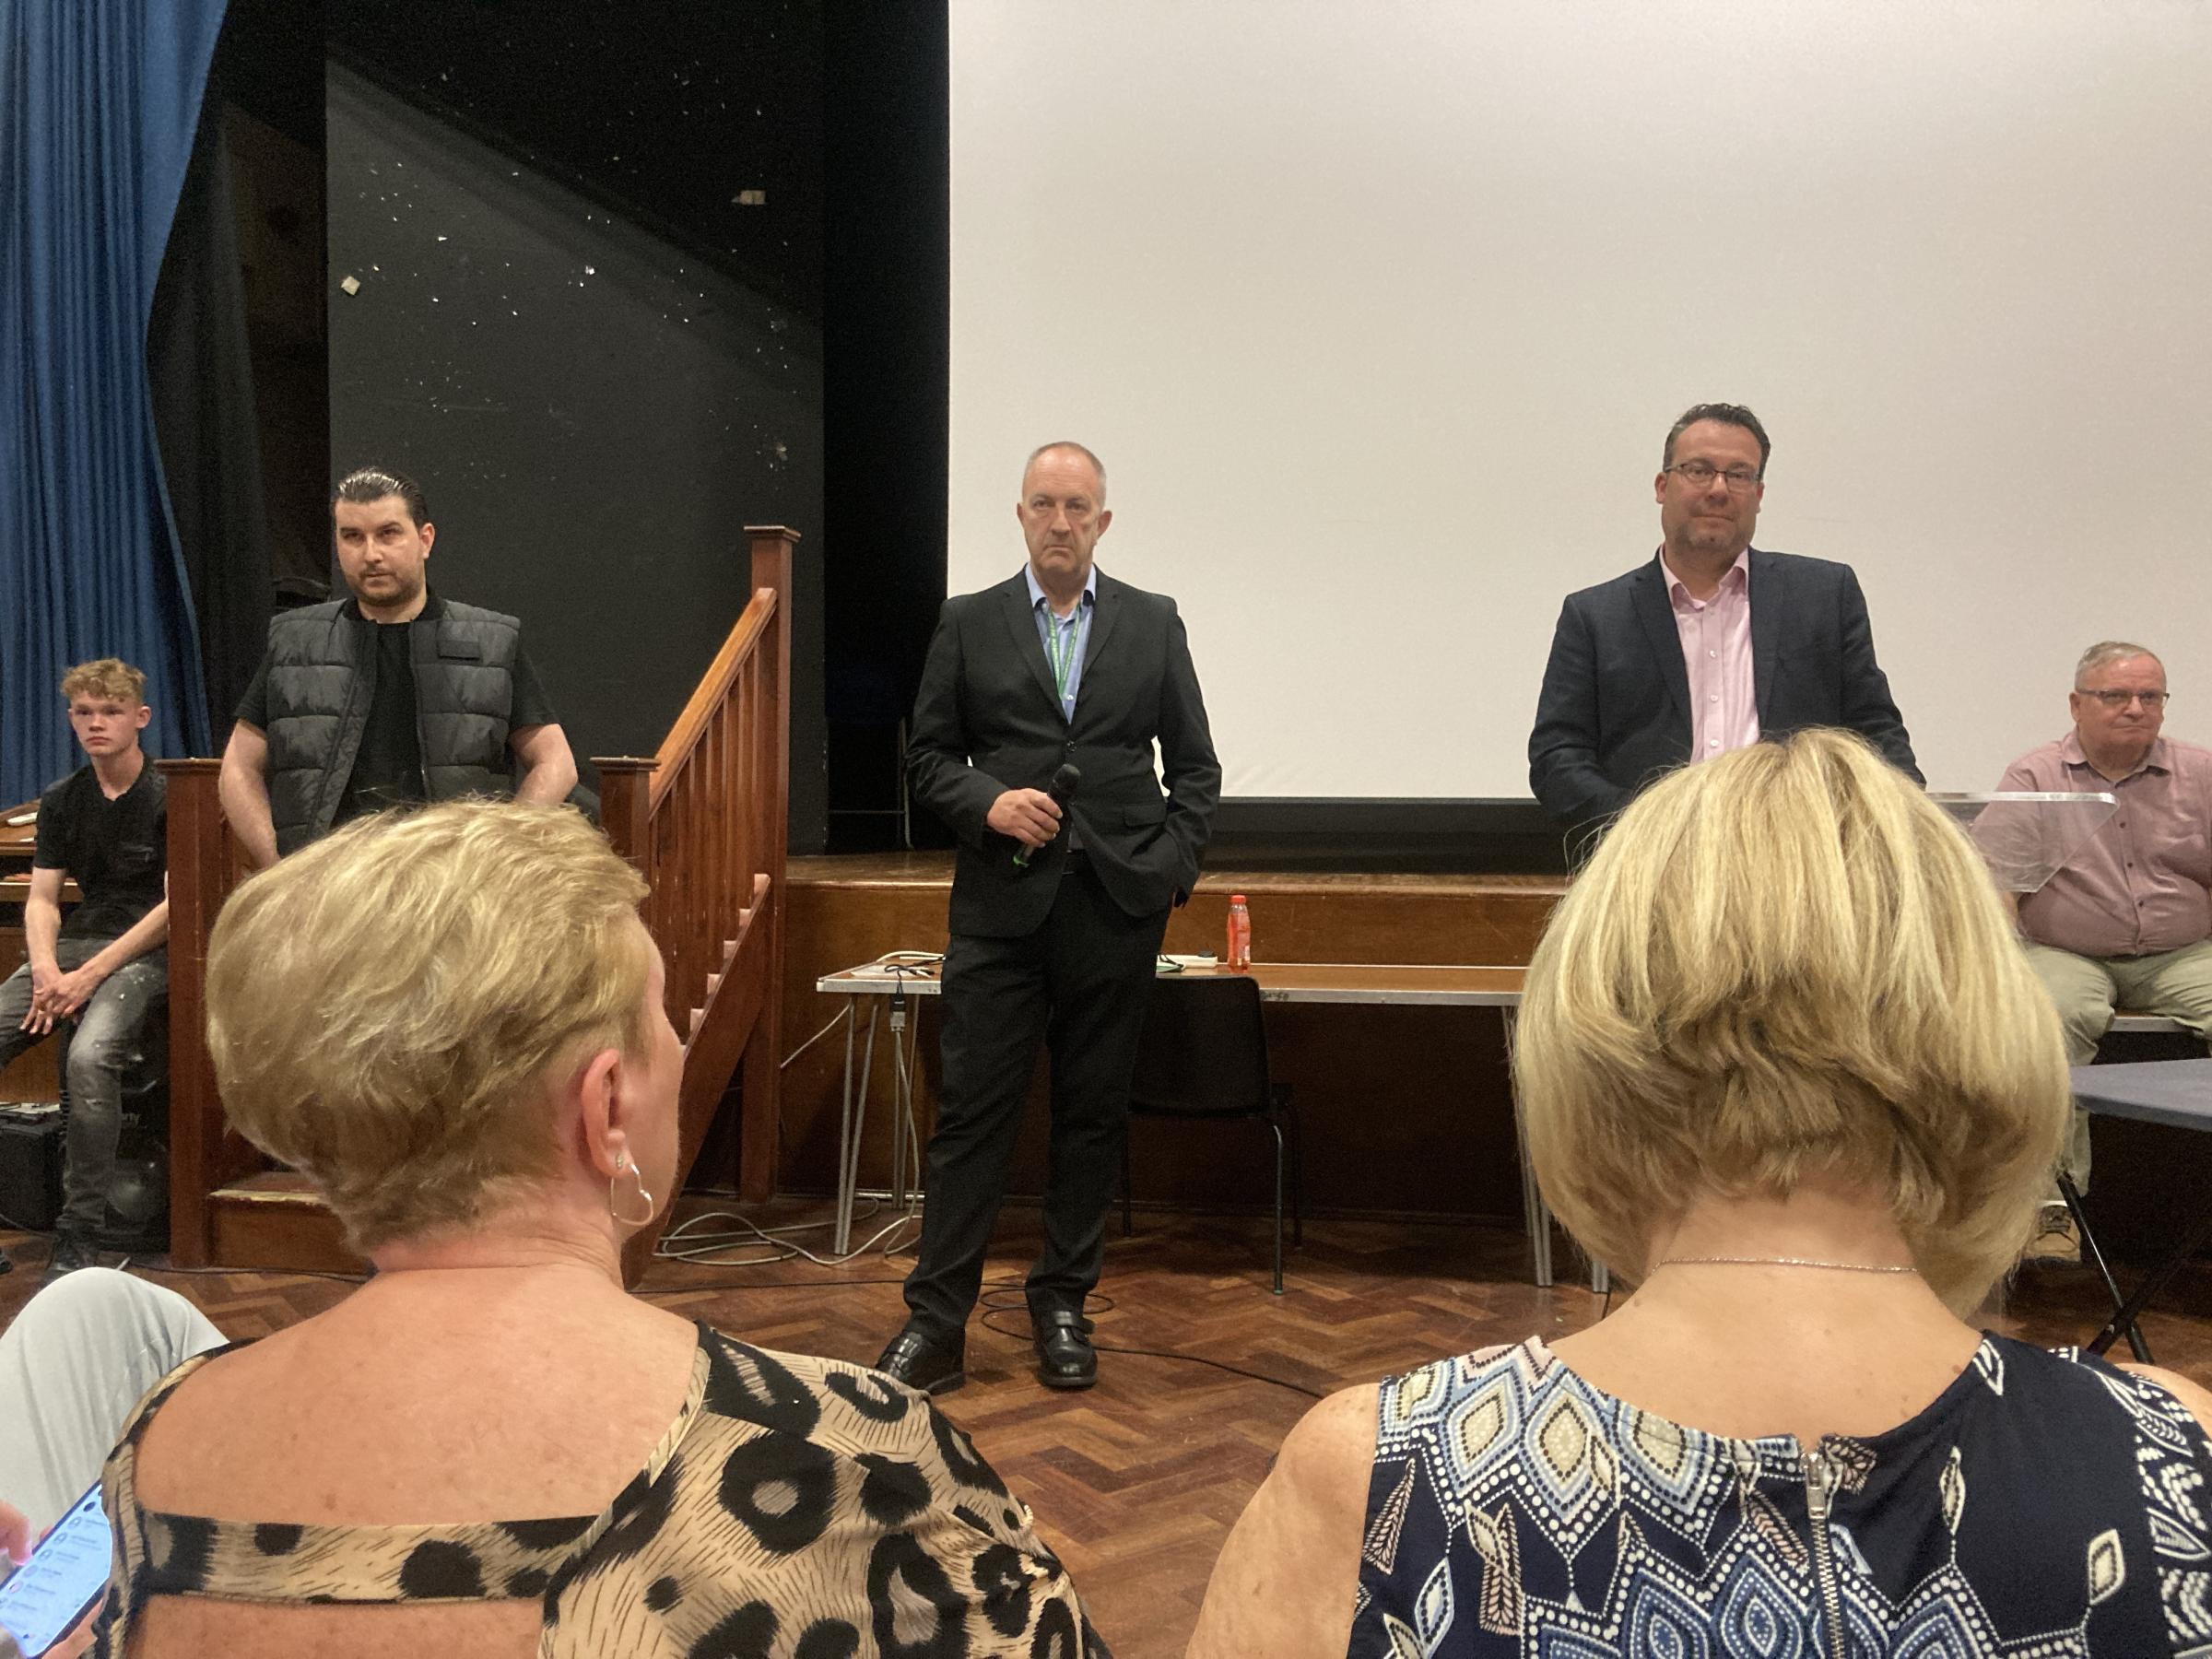 (Left to right) the landowners agent Liam Nicholson, council leader Ray Morgon, the councils chief executive Andrew Blake-Herbert. Image: LDRS